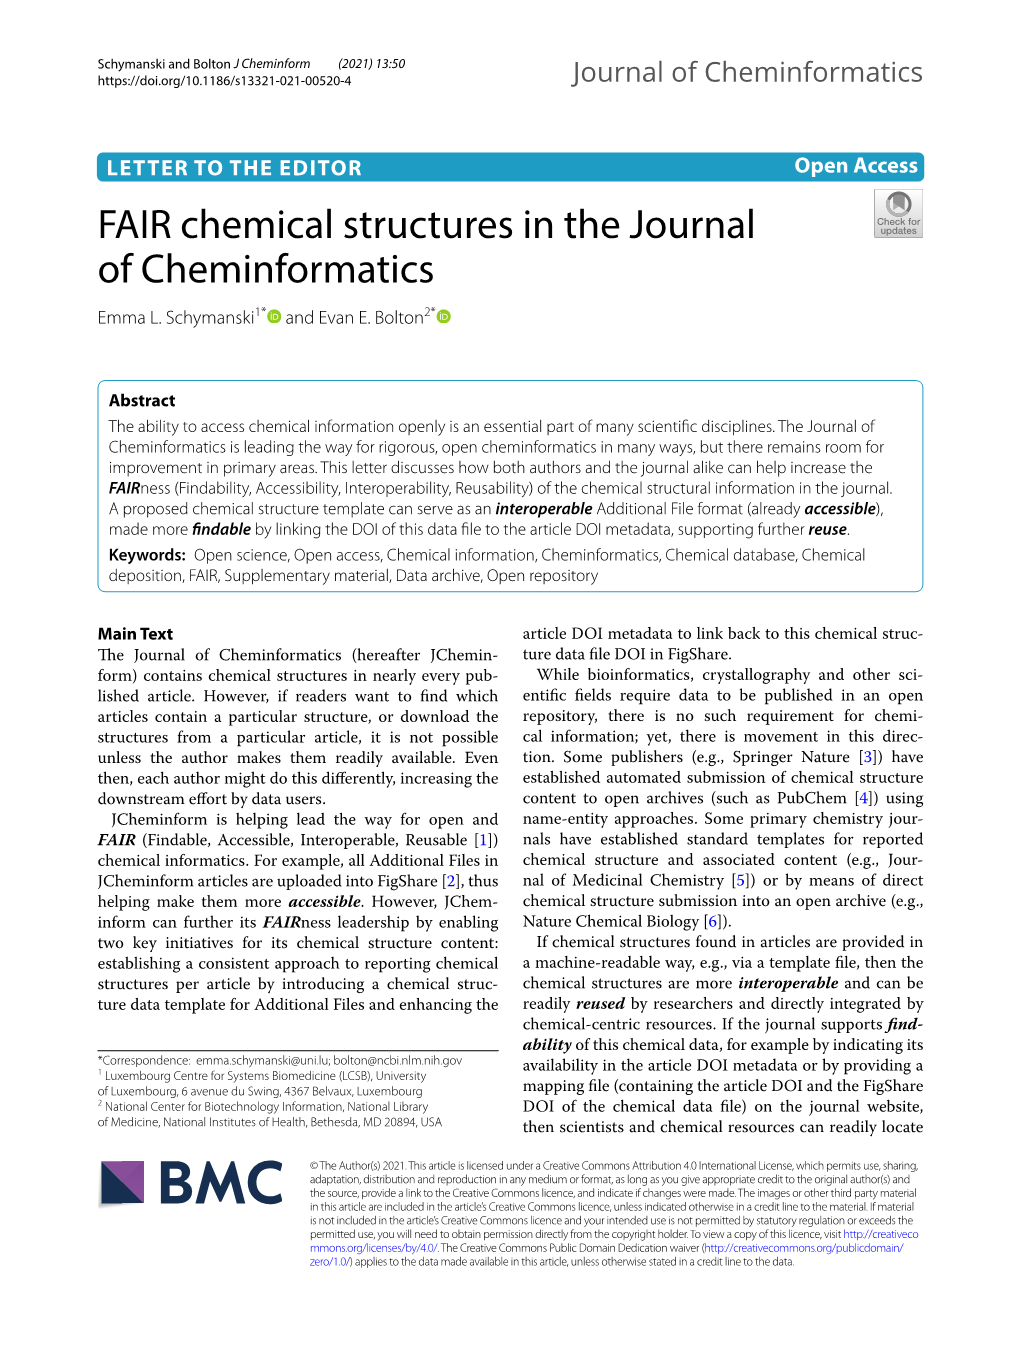 FAIR Chemical Structures in the Journal of Cheminformatics Emma L